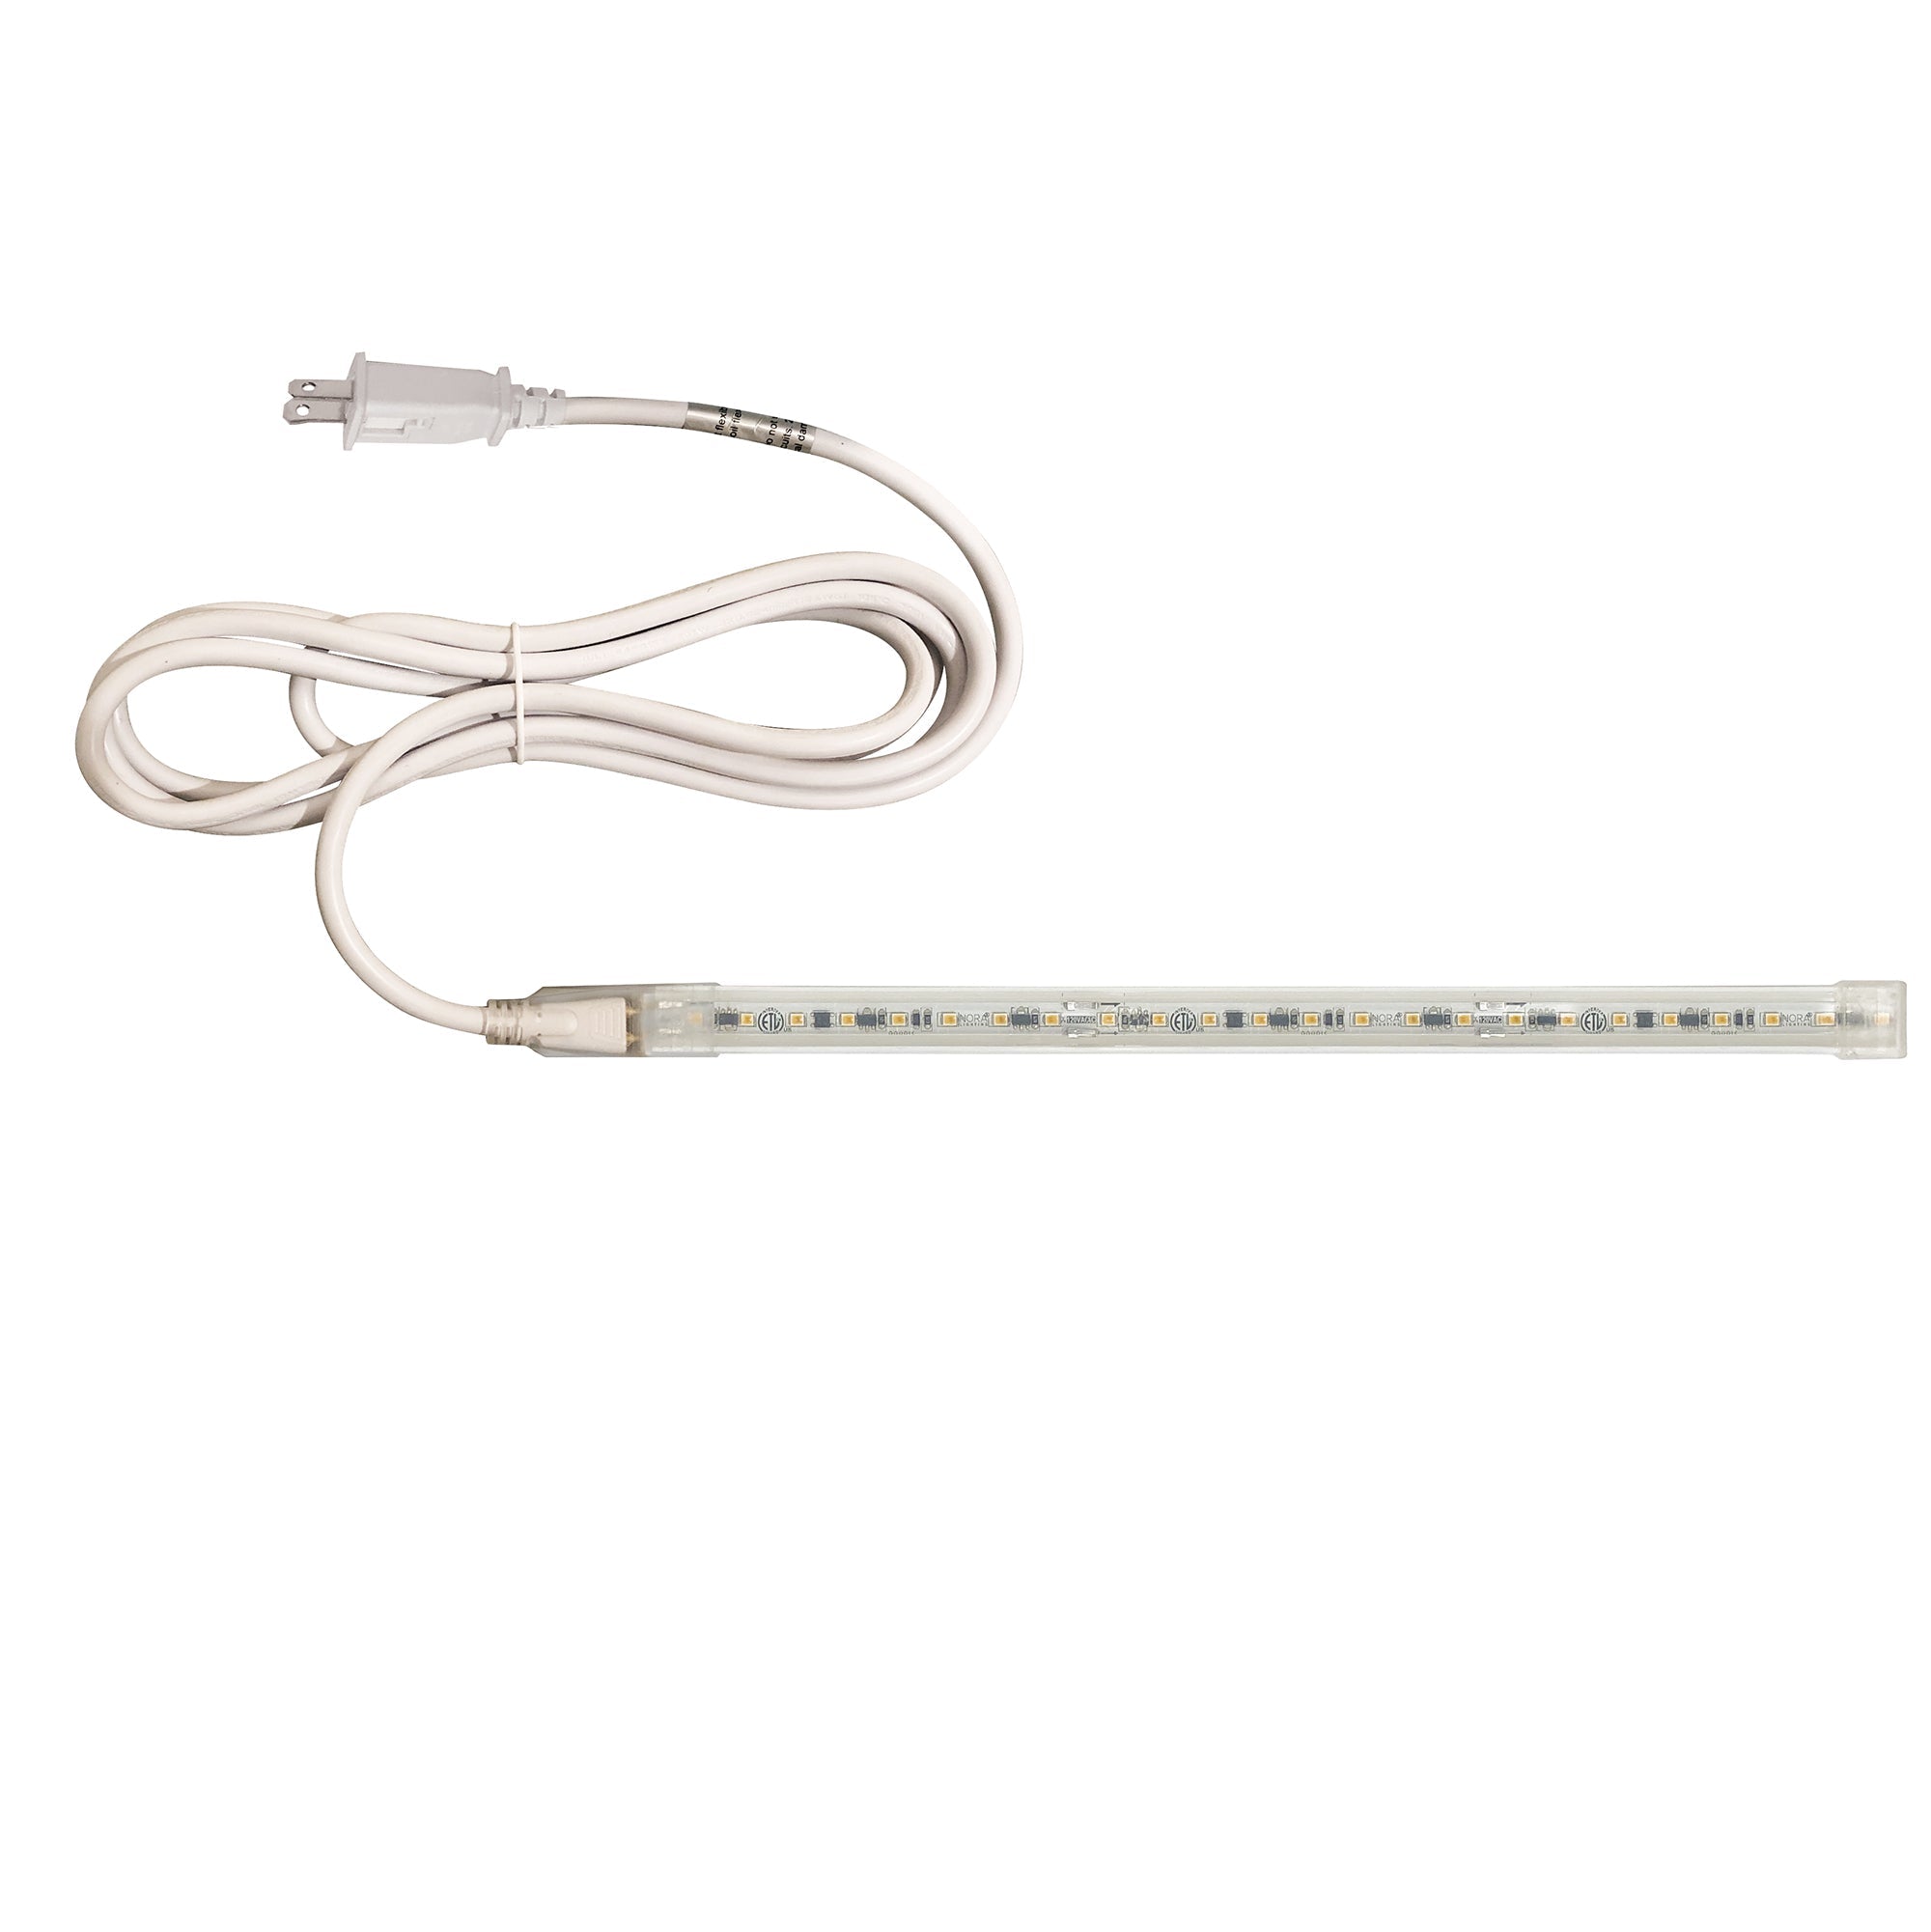 Nora Lighting NUTP13-W65-12-930/CP - Accent / Undercabinet - Custom Cut 65-ft 120V Continuous LED Tape Light, 330lm / 3.6W per foot, 3000K, w/ Mounting Clips and 8' Cord & Plug